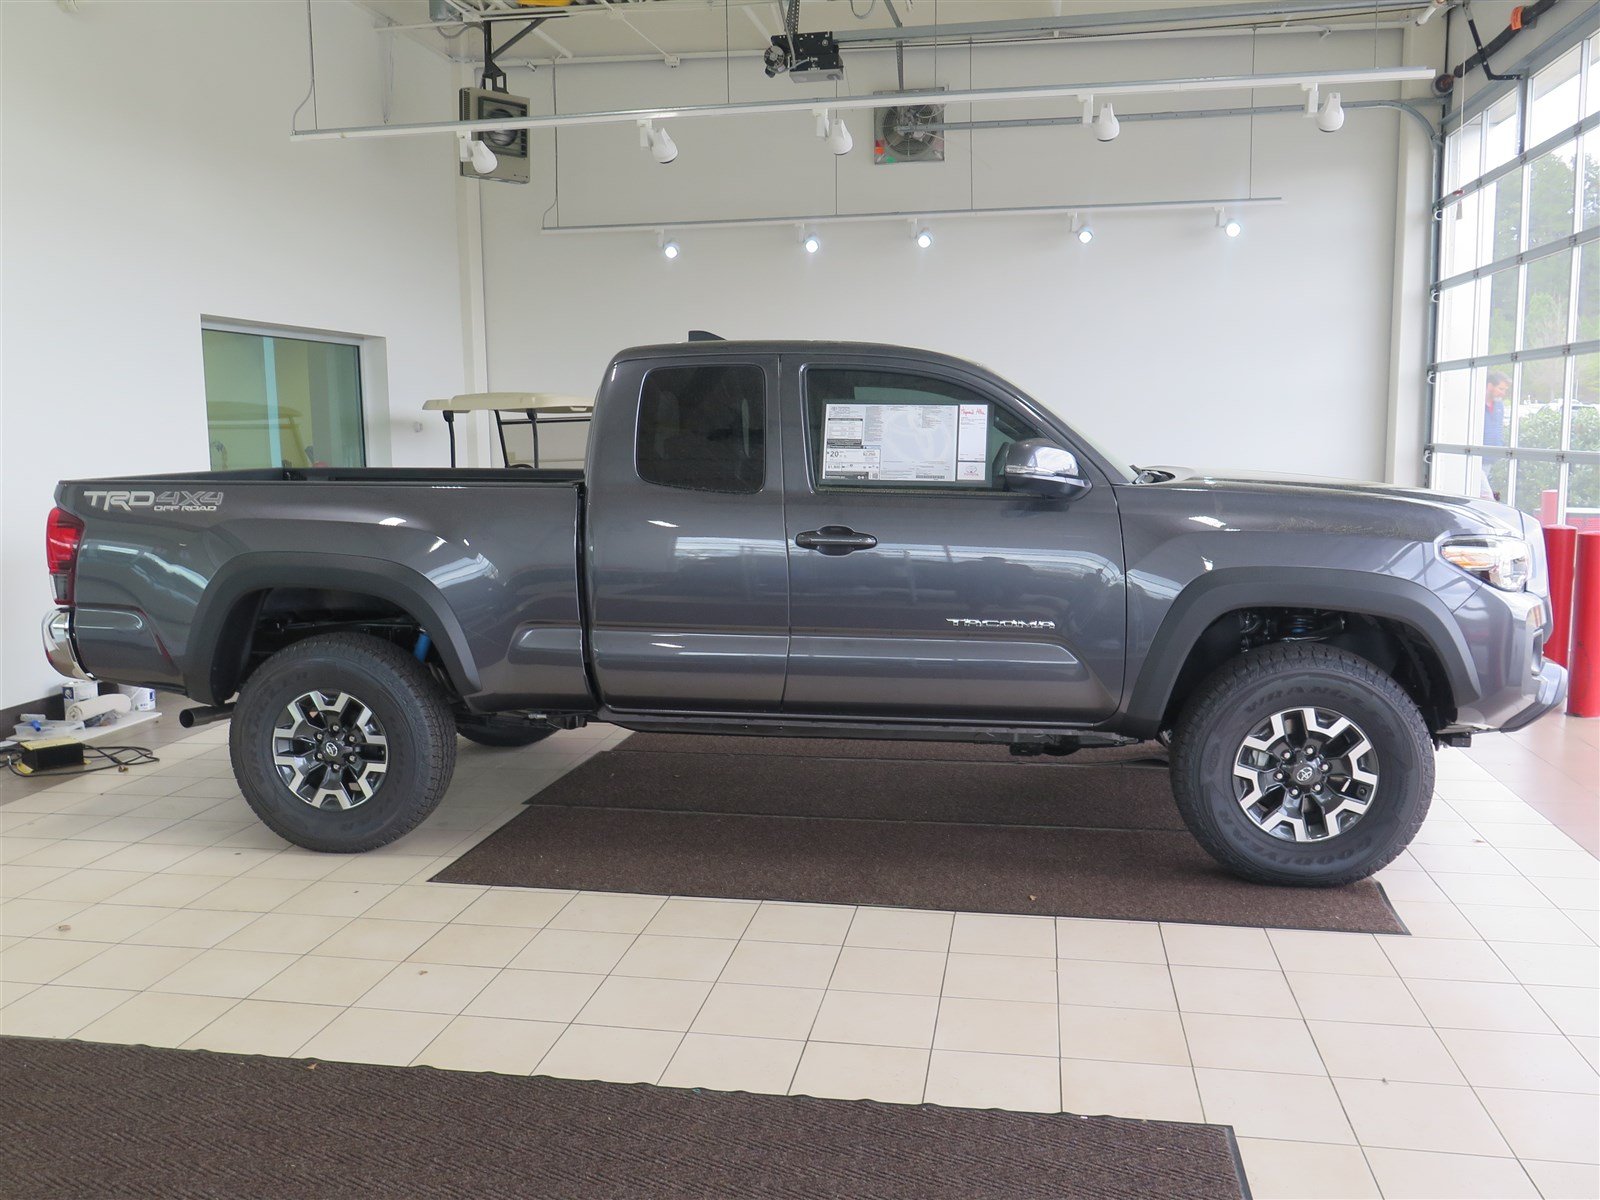 Tacoma Extended Cab Related Keywords & Suggestions - Tacoma 